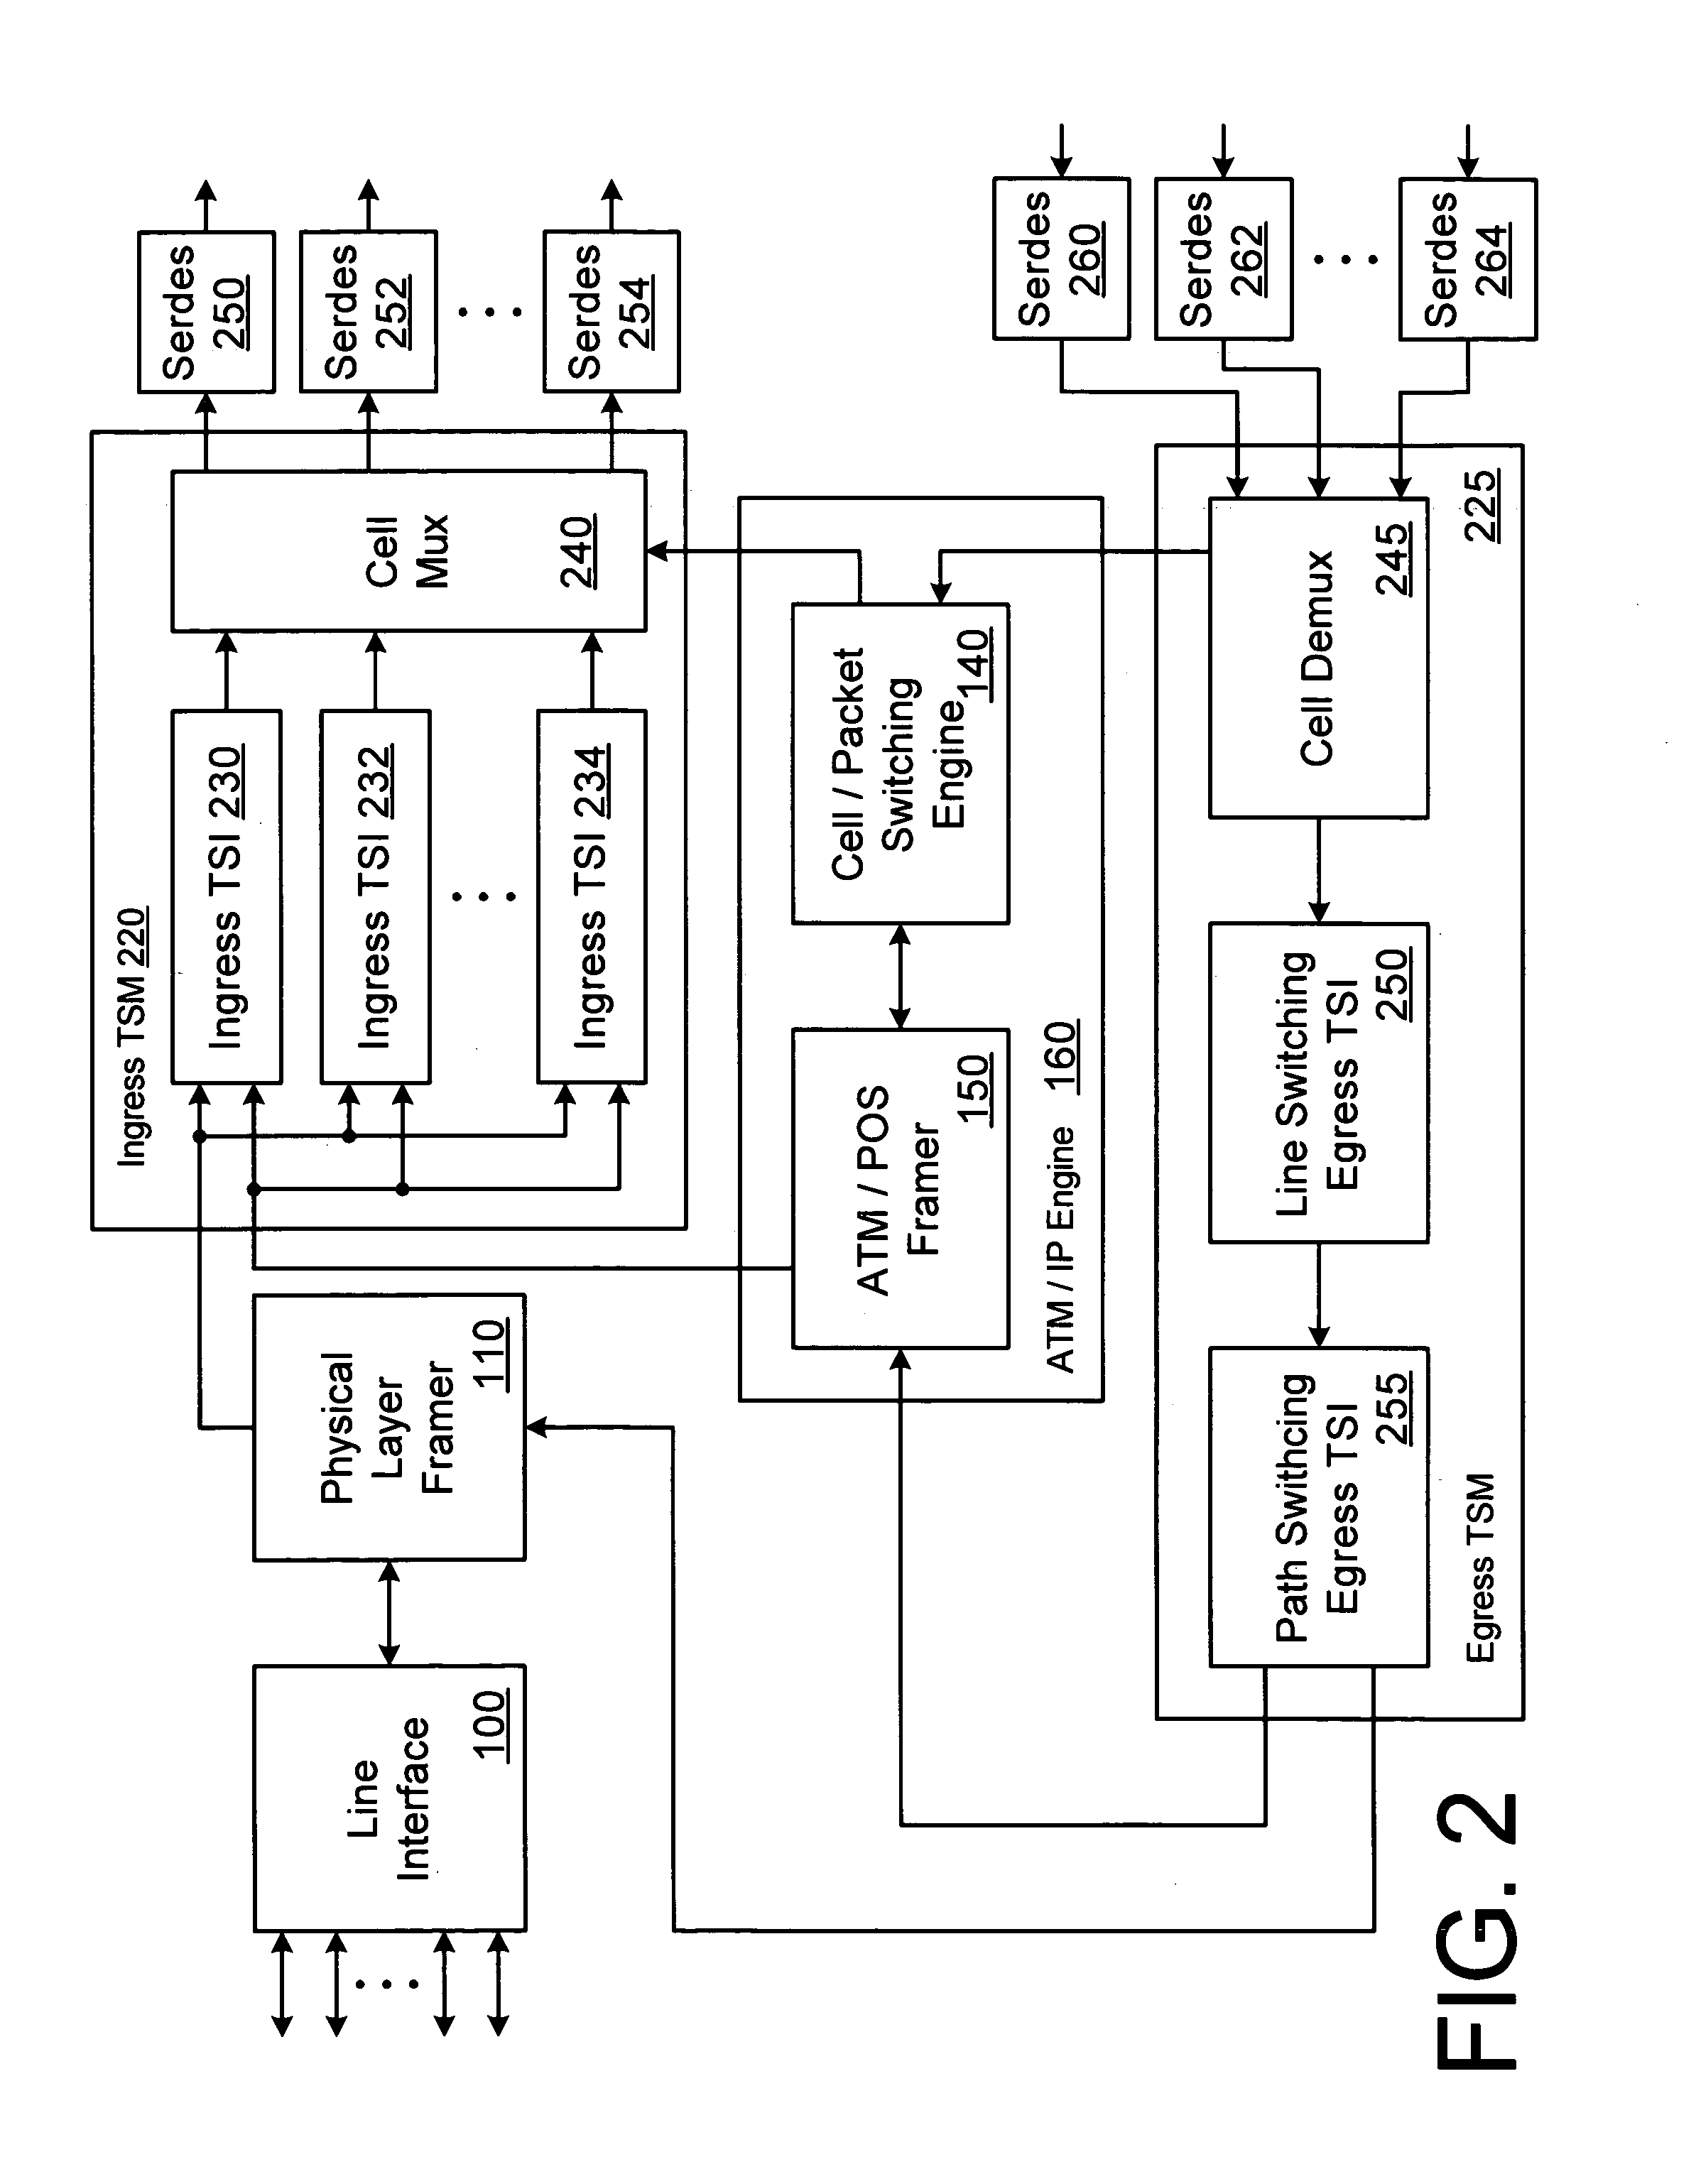 Hybrid time division multiplexing and data transport